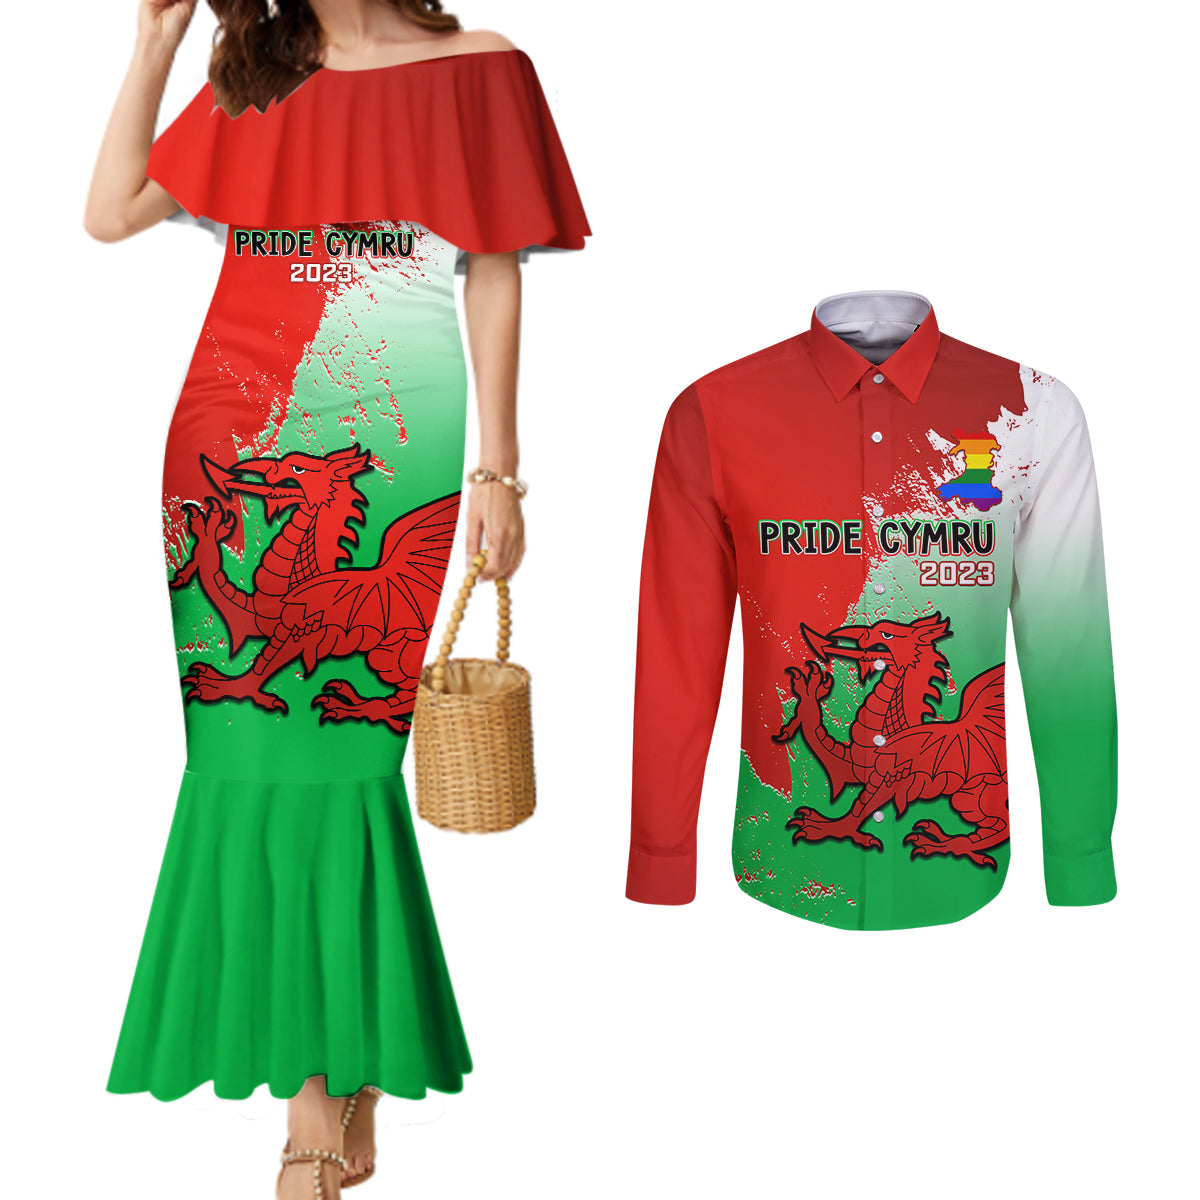 custom-pride-cymru-couples-matching-mermaid-dress-and-long-sleeve-button-shirts-2023-wales-lgbt-with-welsh-red-dragon